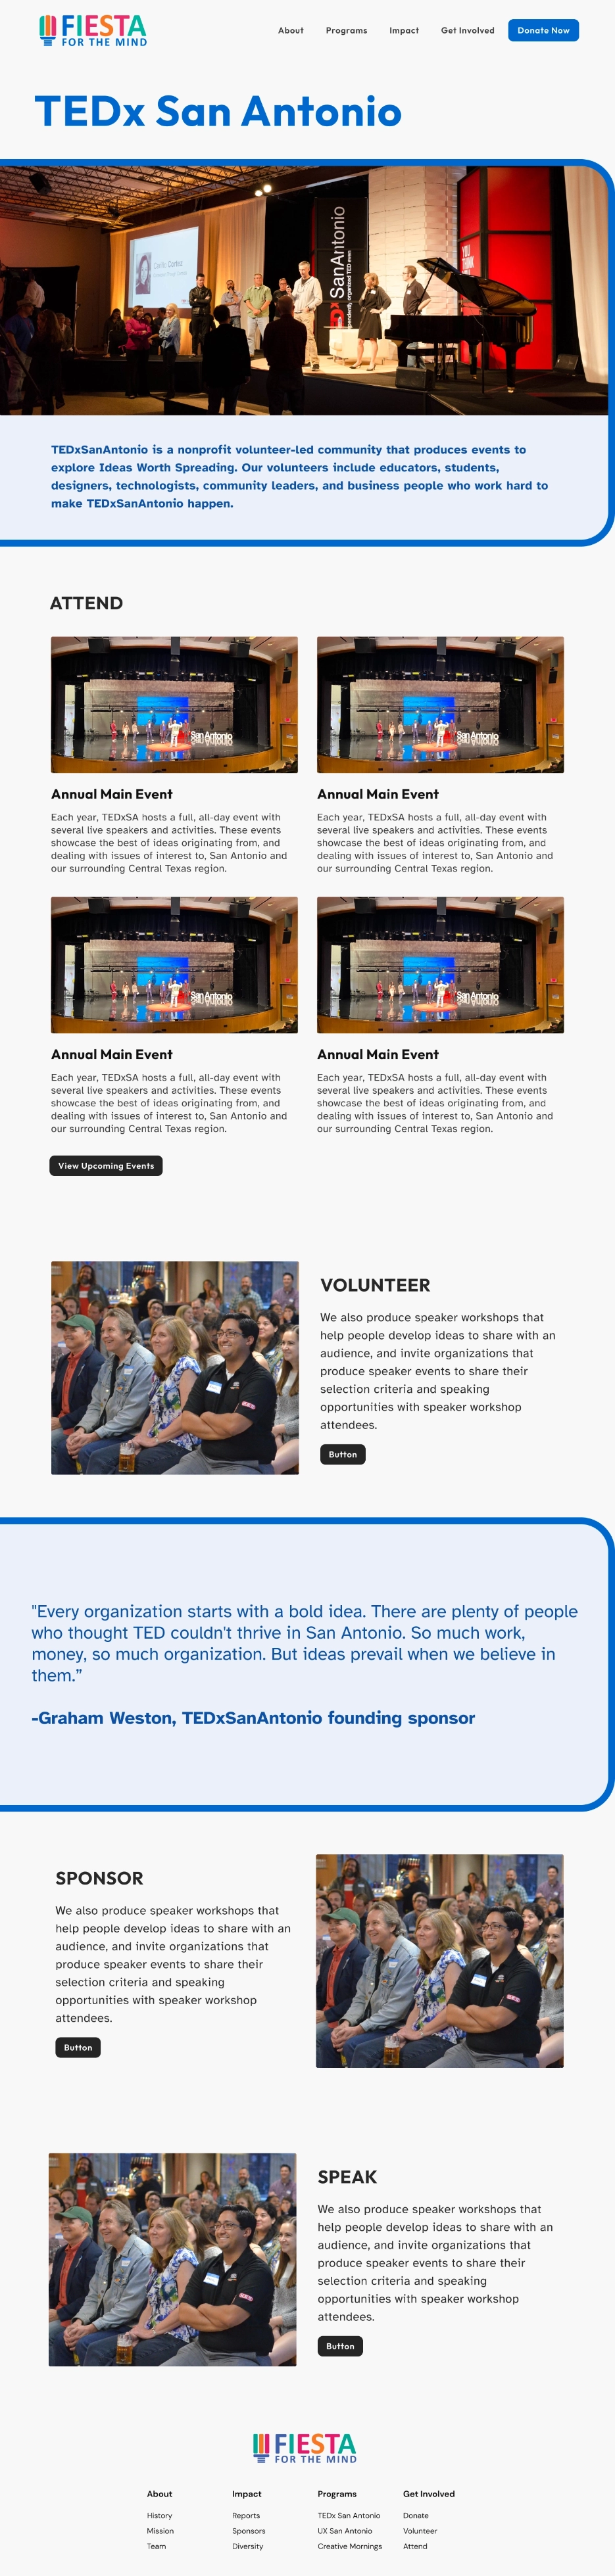 TEDx San Antonio page mockup, with a hero section describing the event along with details on how to attend or to volunteer.